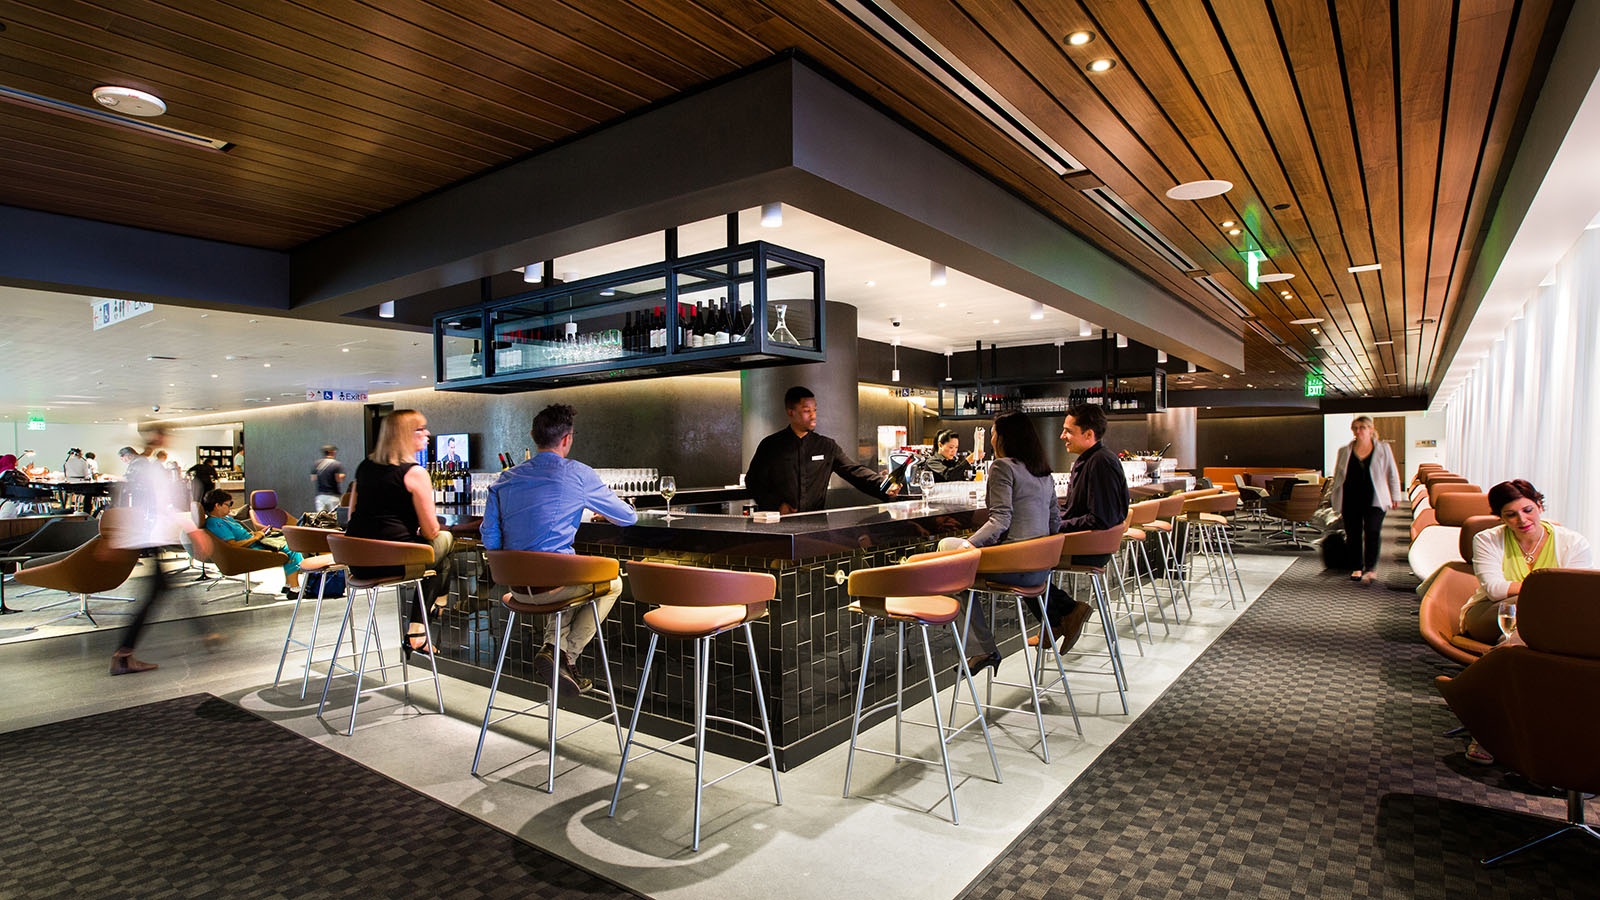 Staffed bar in the Qantas International Business Lounge in Los Angeles